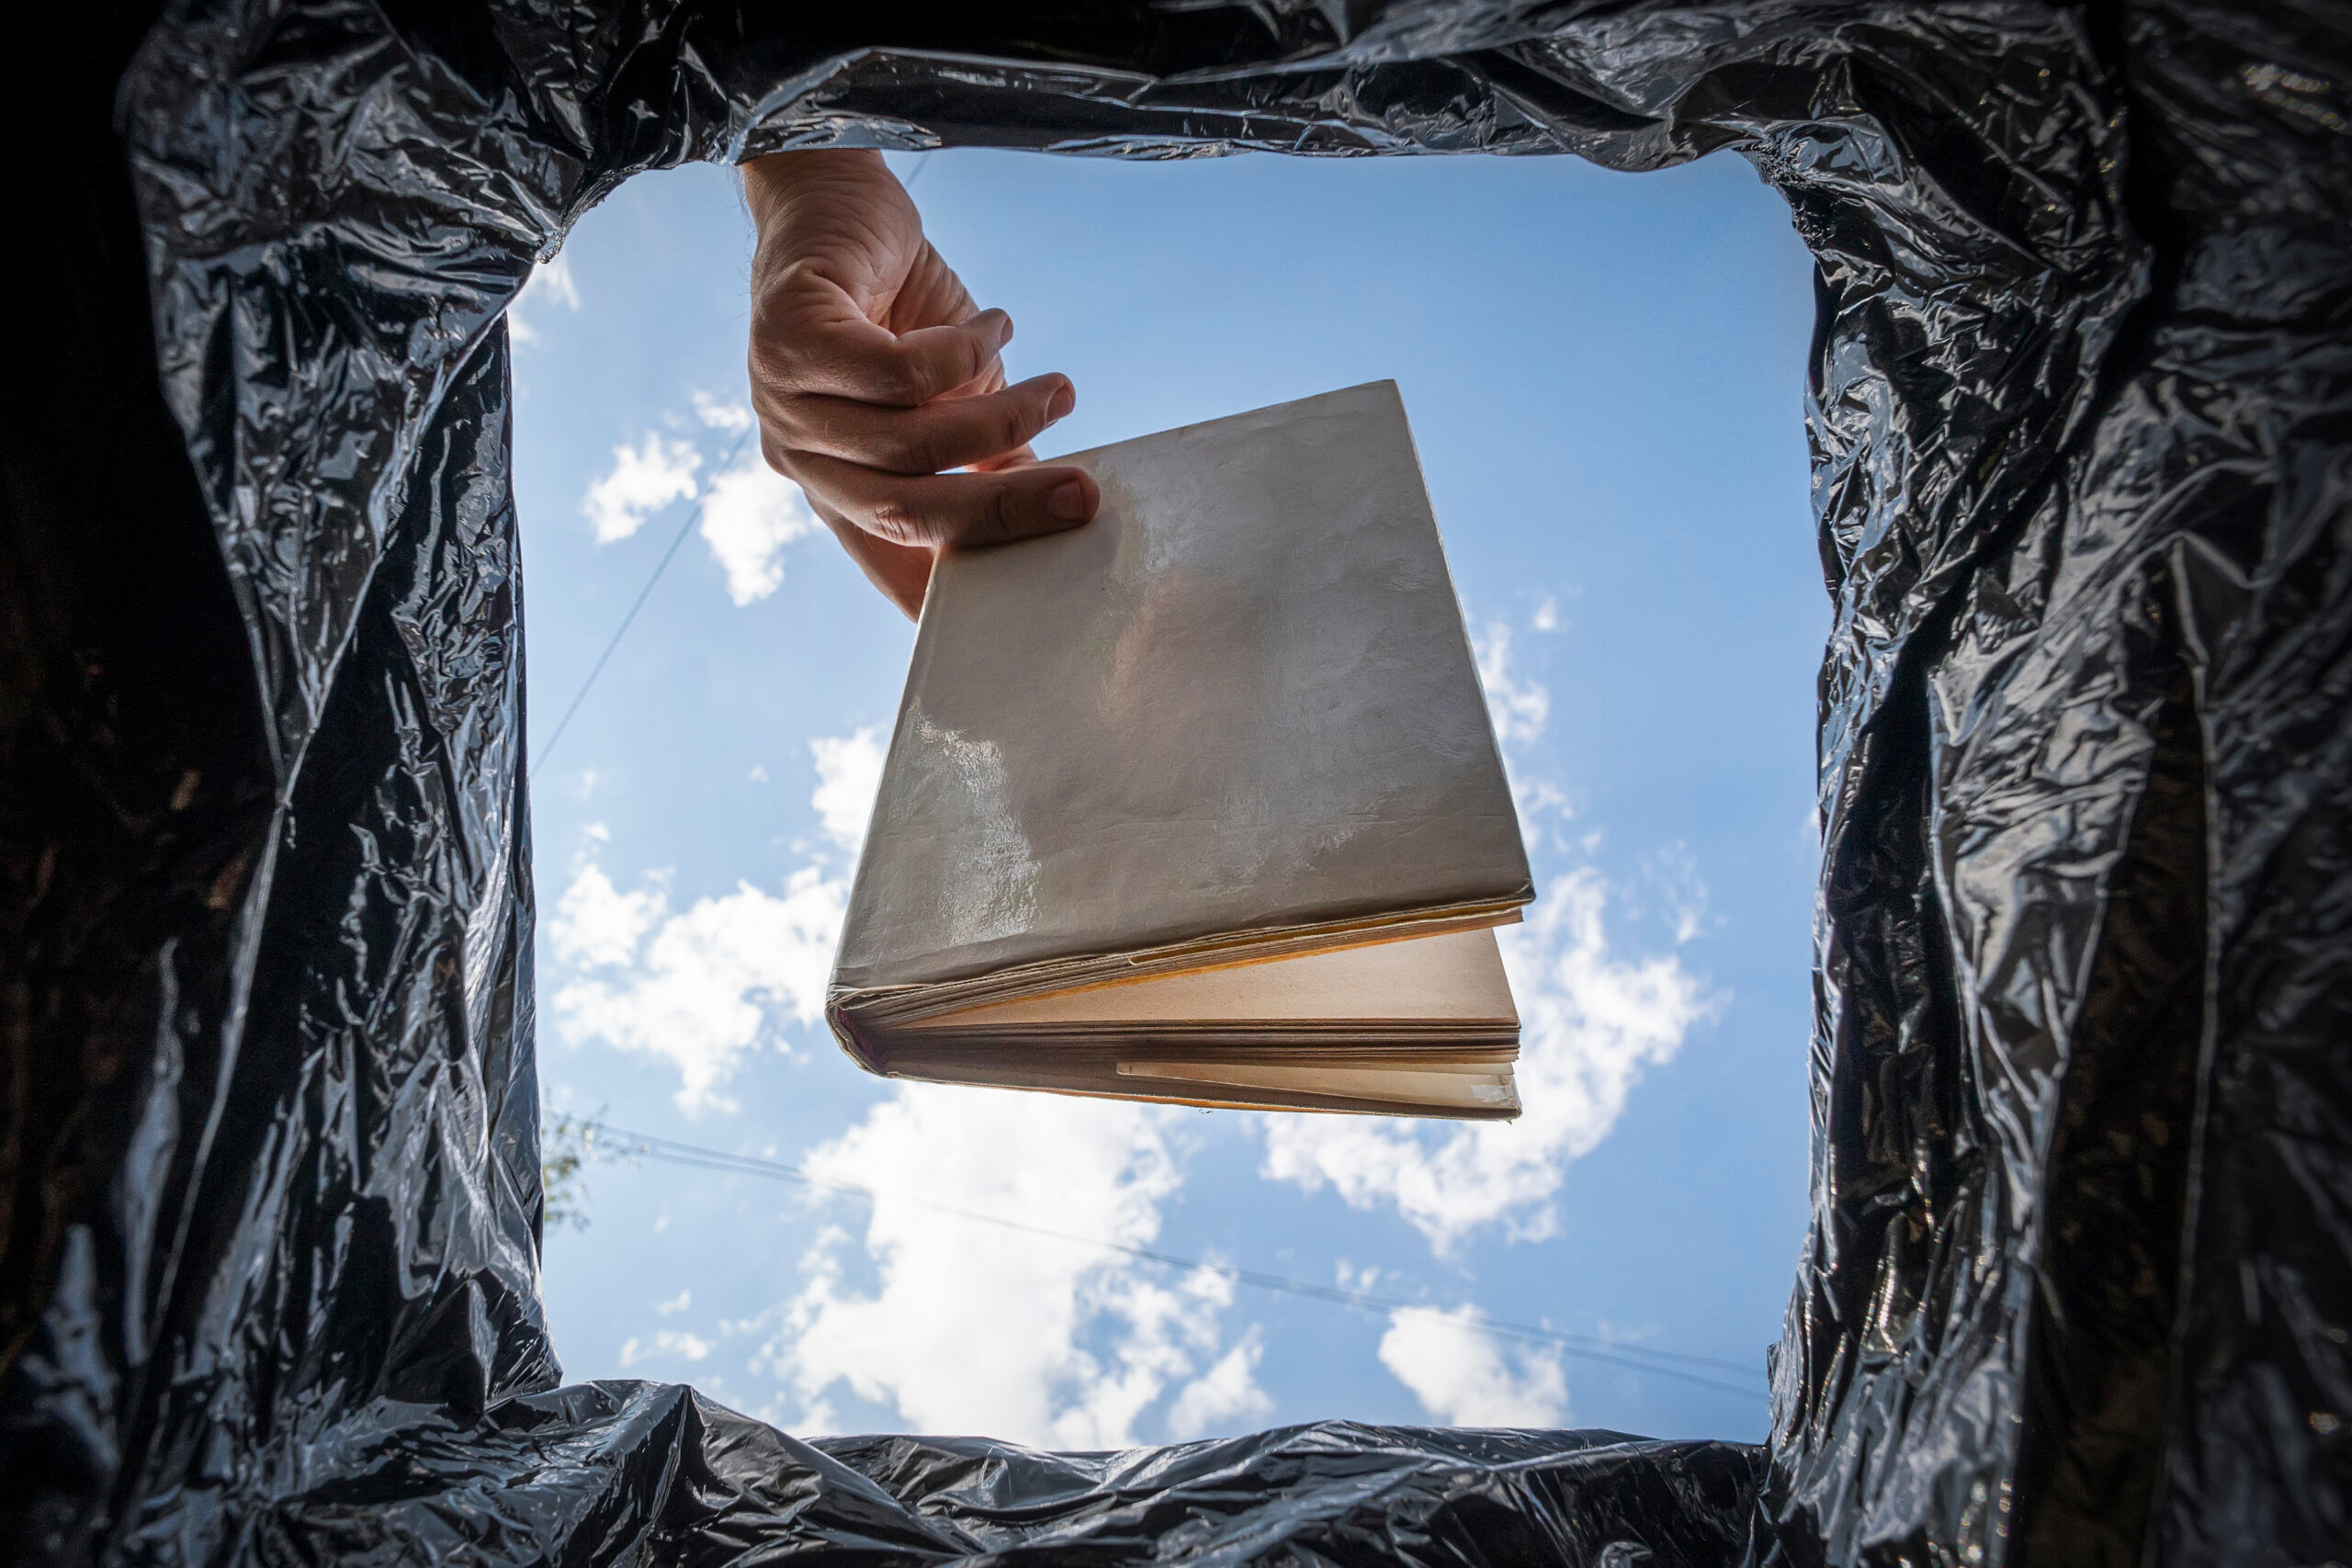 View from inside trash can as someone throws away a book against a sunny sky backdrop